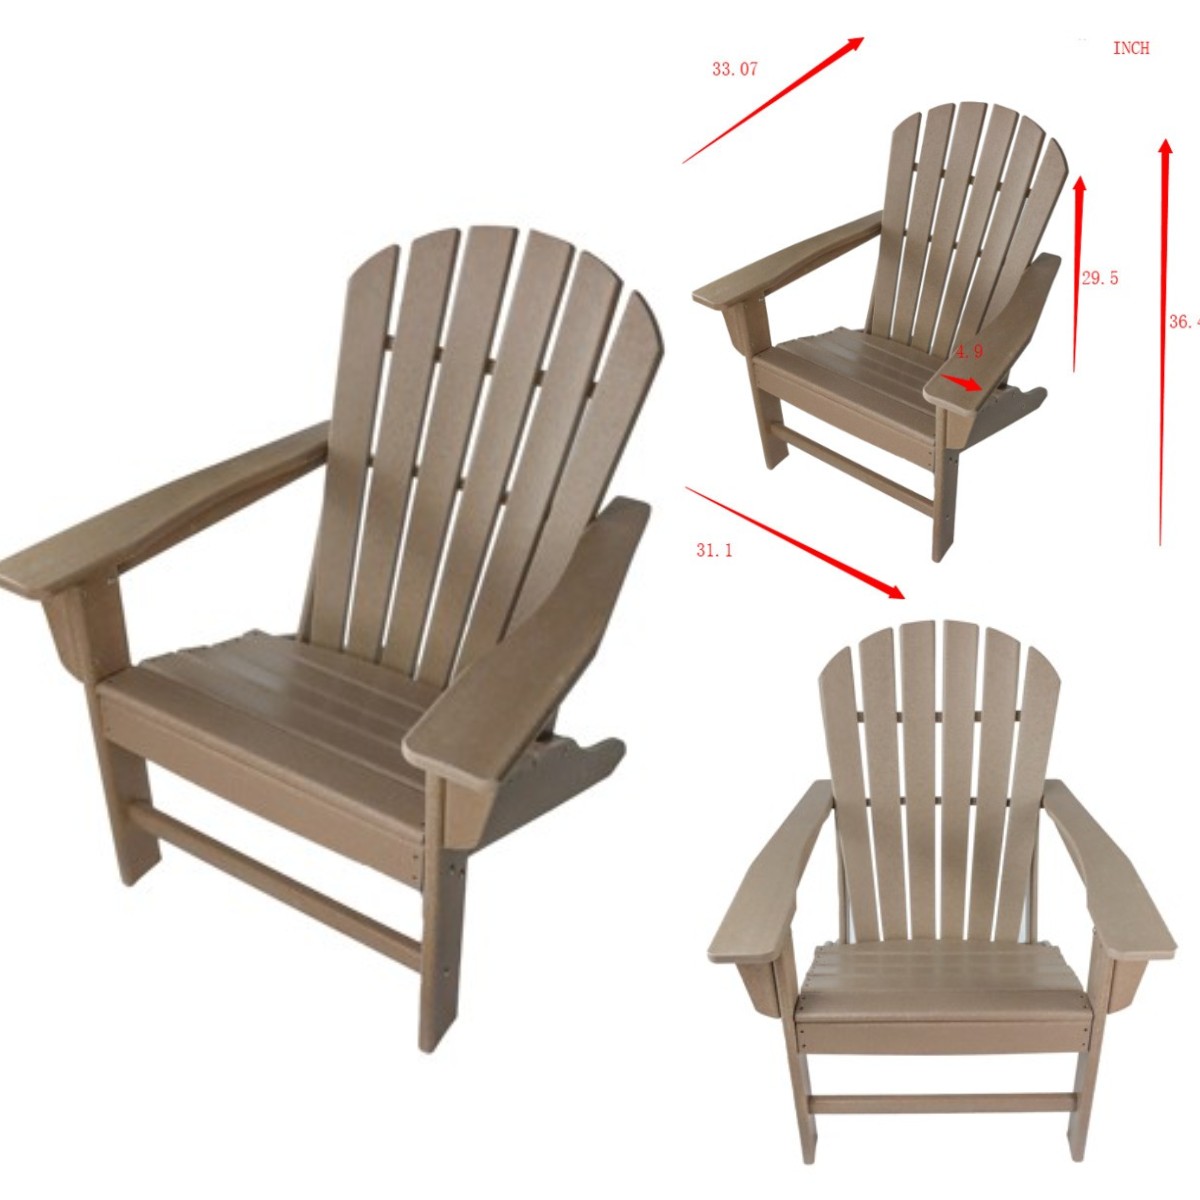 Adirondack Chair Resin, 350 lbs Capacity Load,Patio Chair Lawn Chair Outdoor Adirondack Chairs Weather Resistant for Patio Deck Garden 33.07*31.1*36.4" HDPE Resin Wood,Brown - image 4 of 8